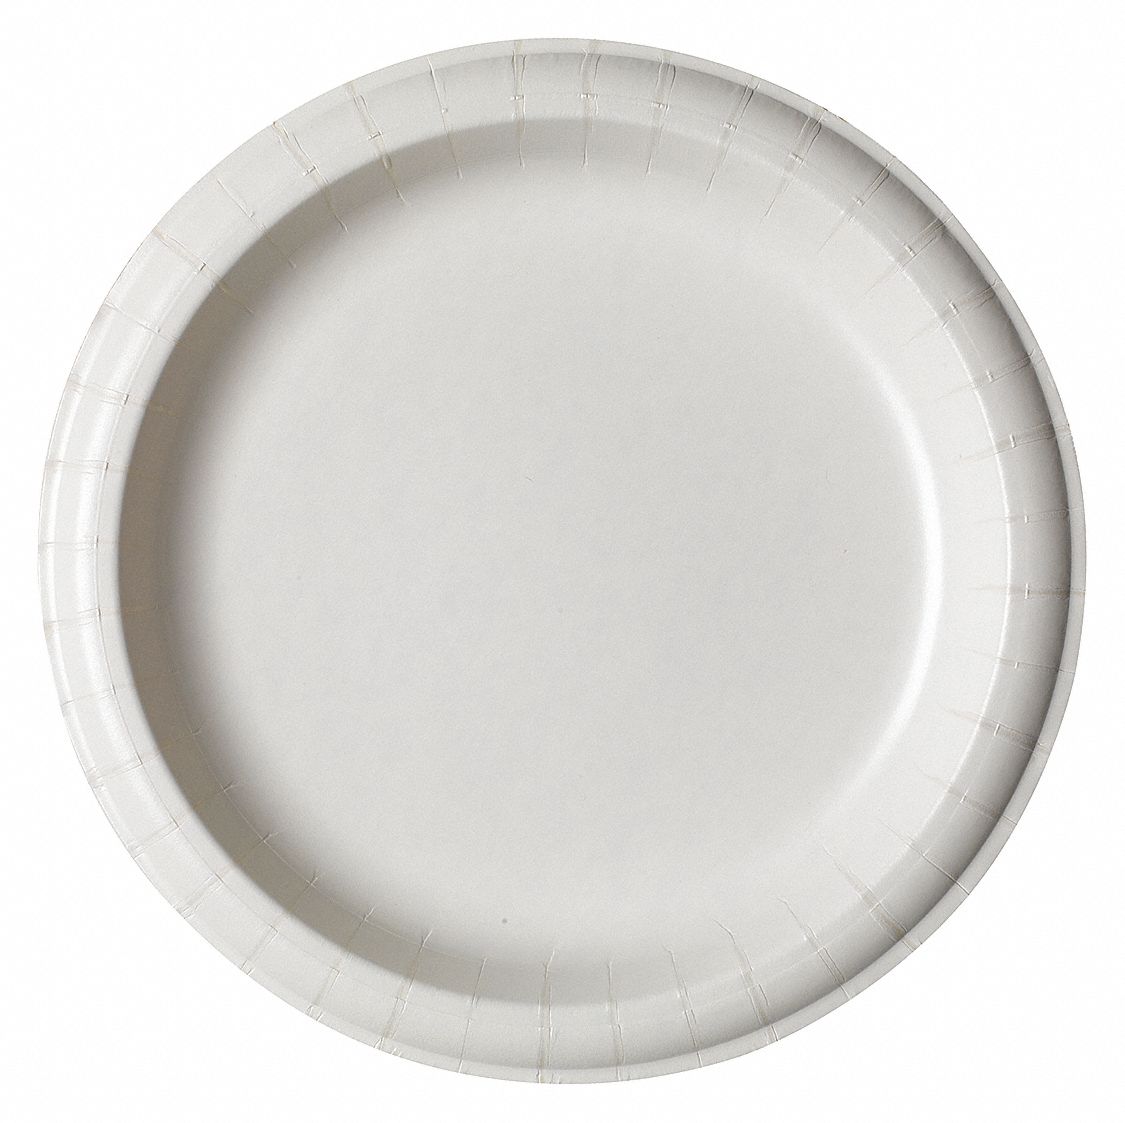 Dixie 7 Medium Weight Coated Paper Plates - 125CT - 44215